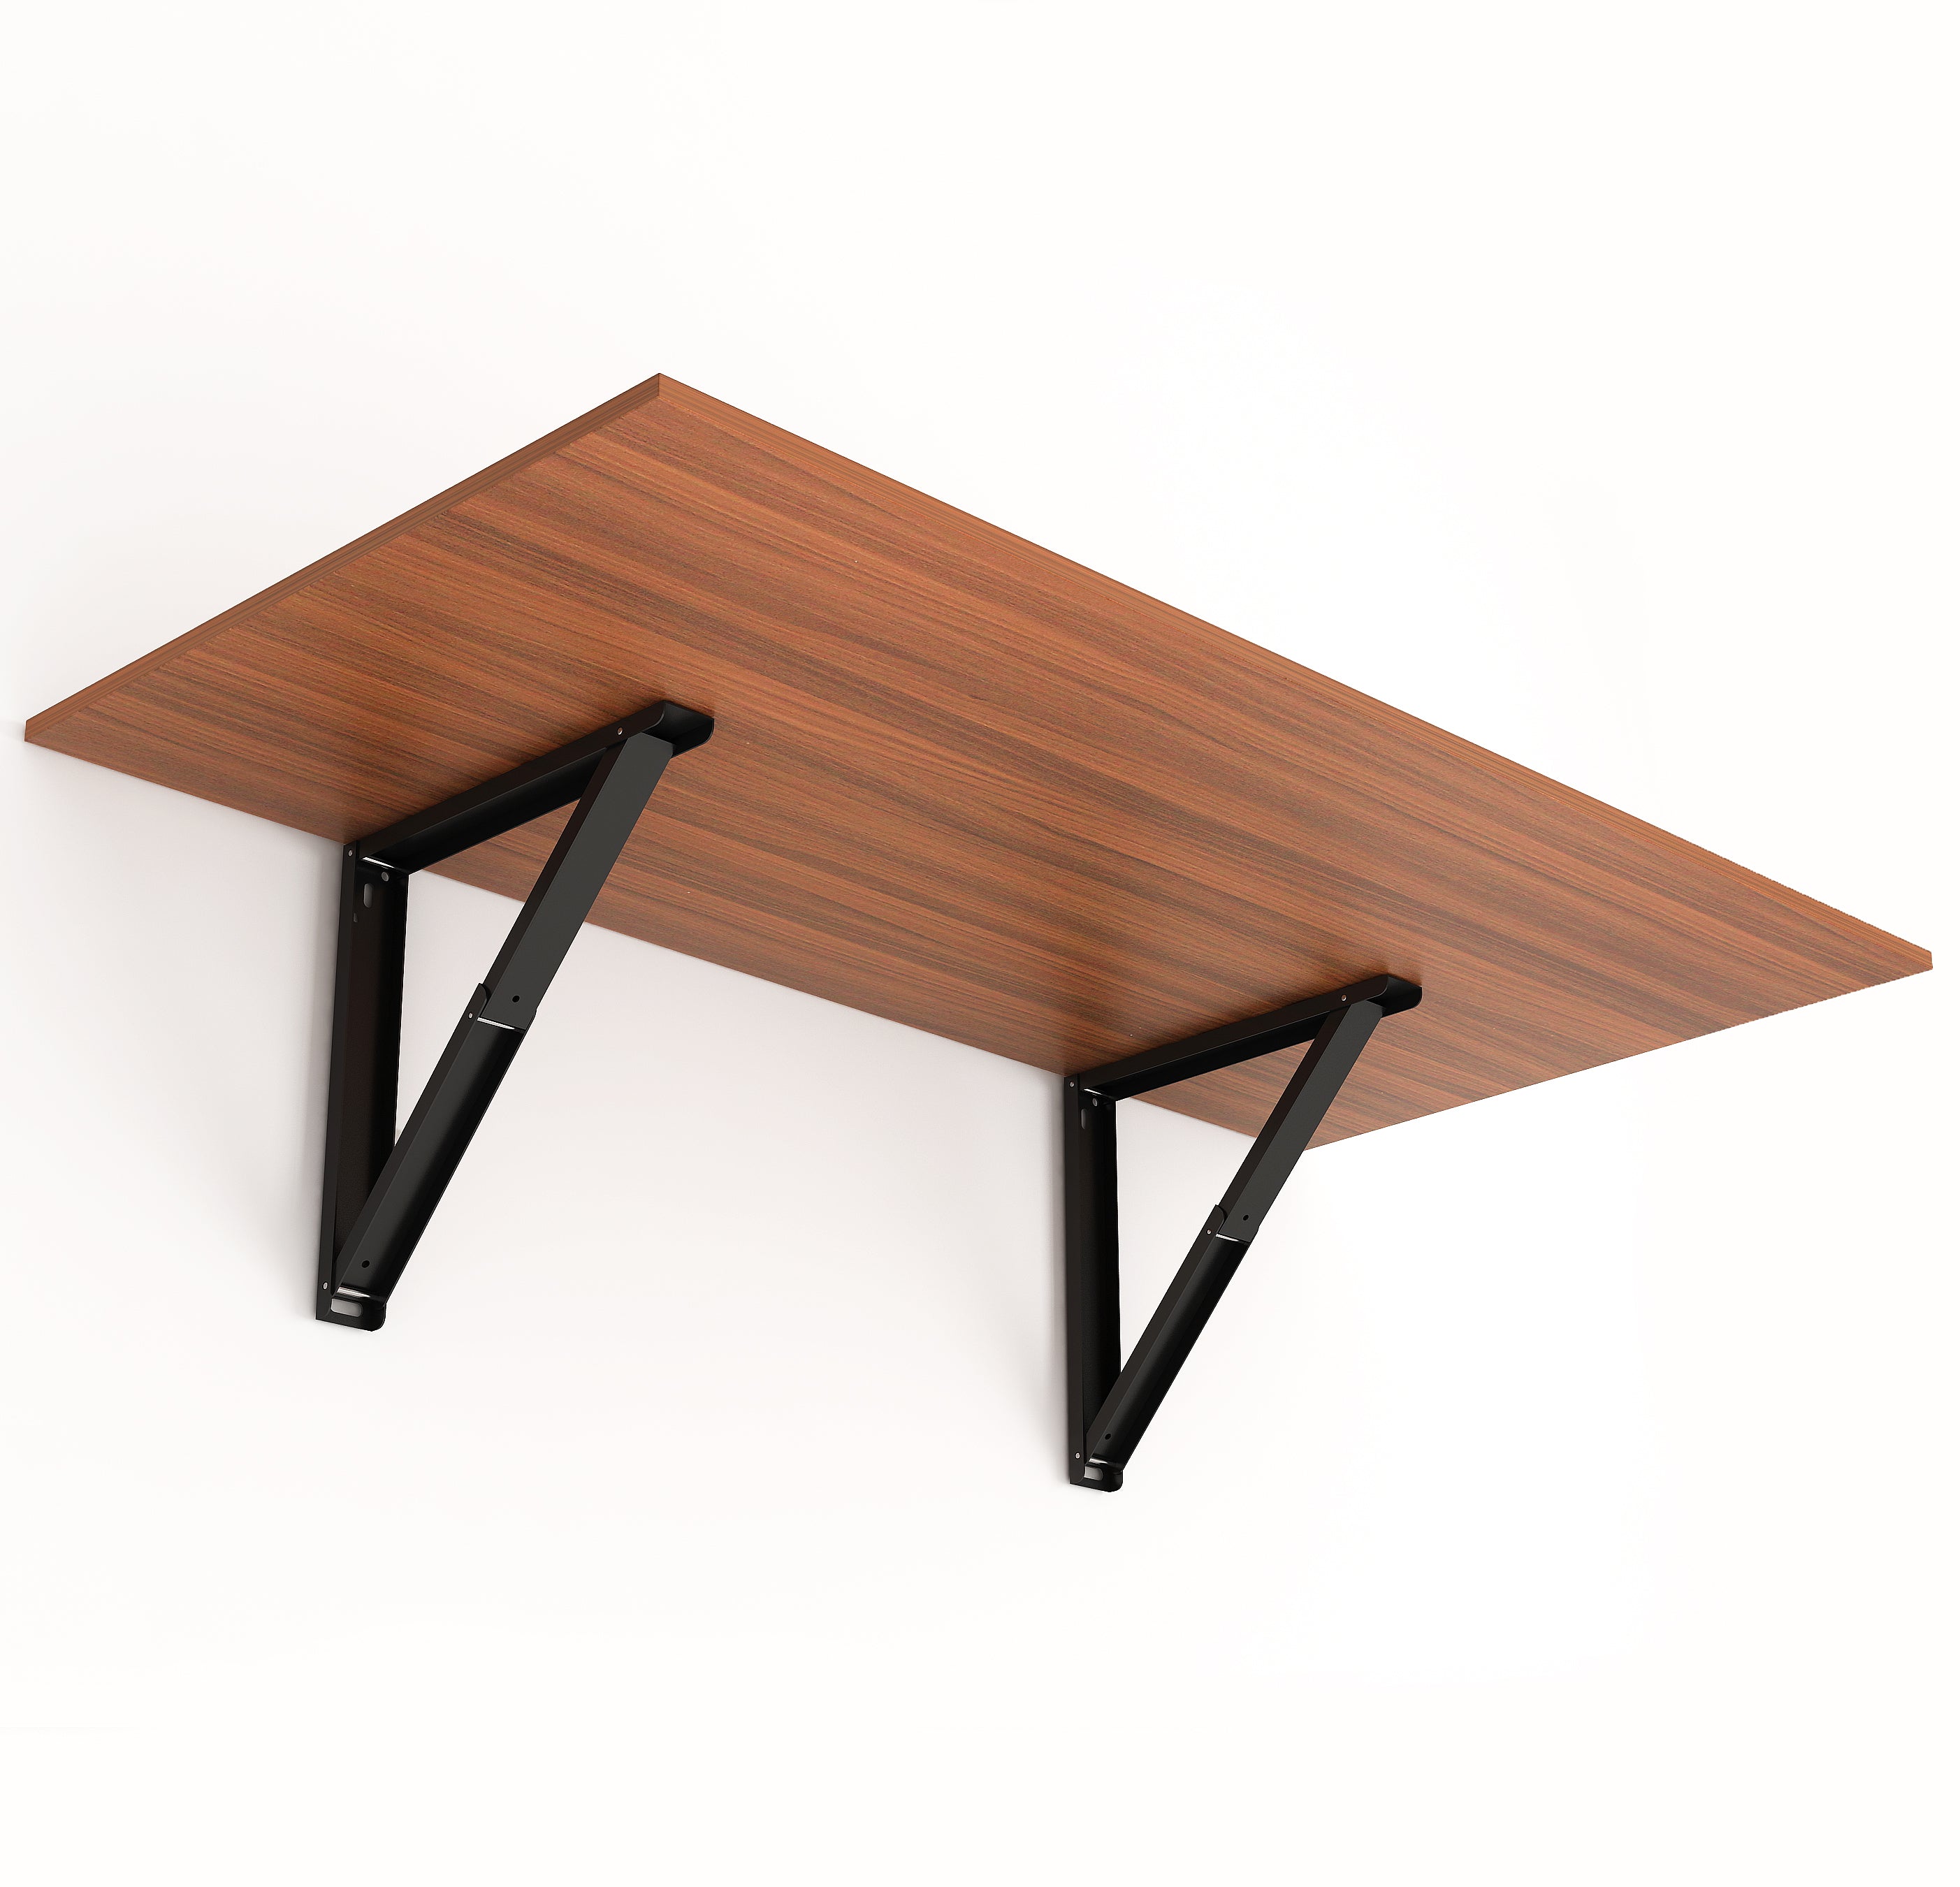 Wall Mounted Dining Table For 6 - k7off